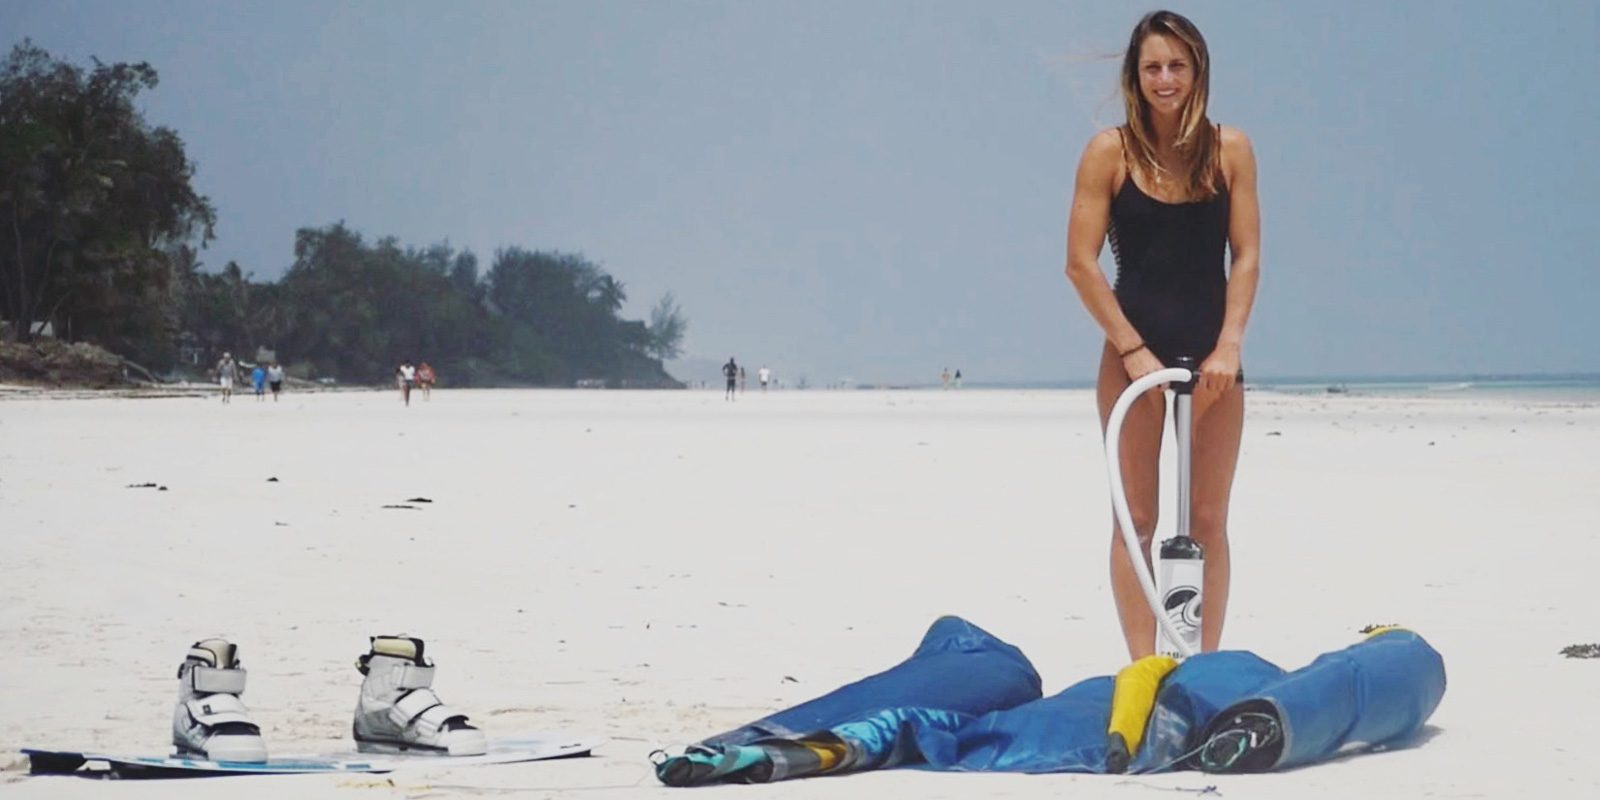 5 Essential Questions You Should Ask a Female Professional Kiteboarder – Annelous Lammerts